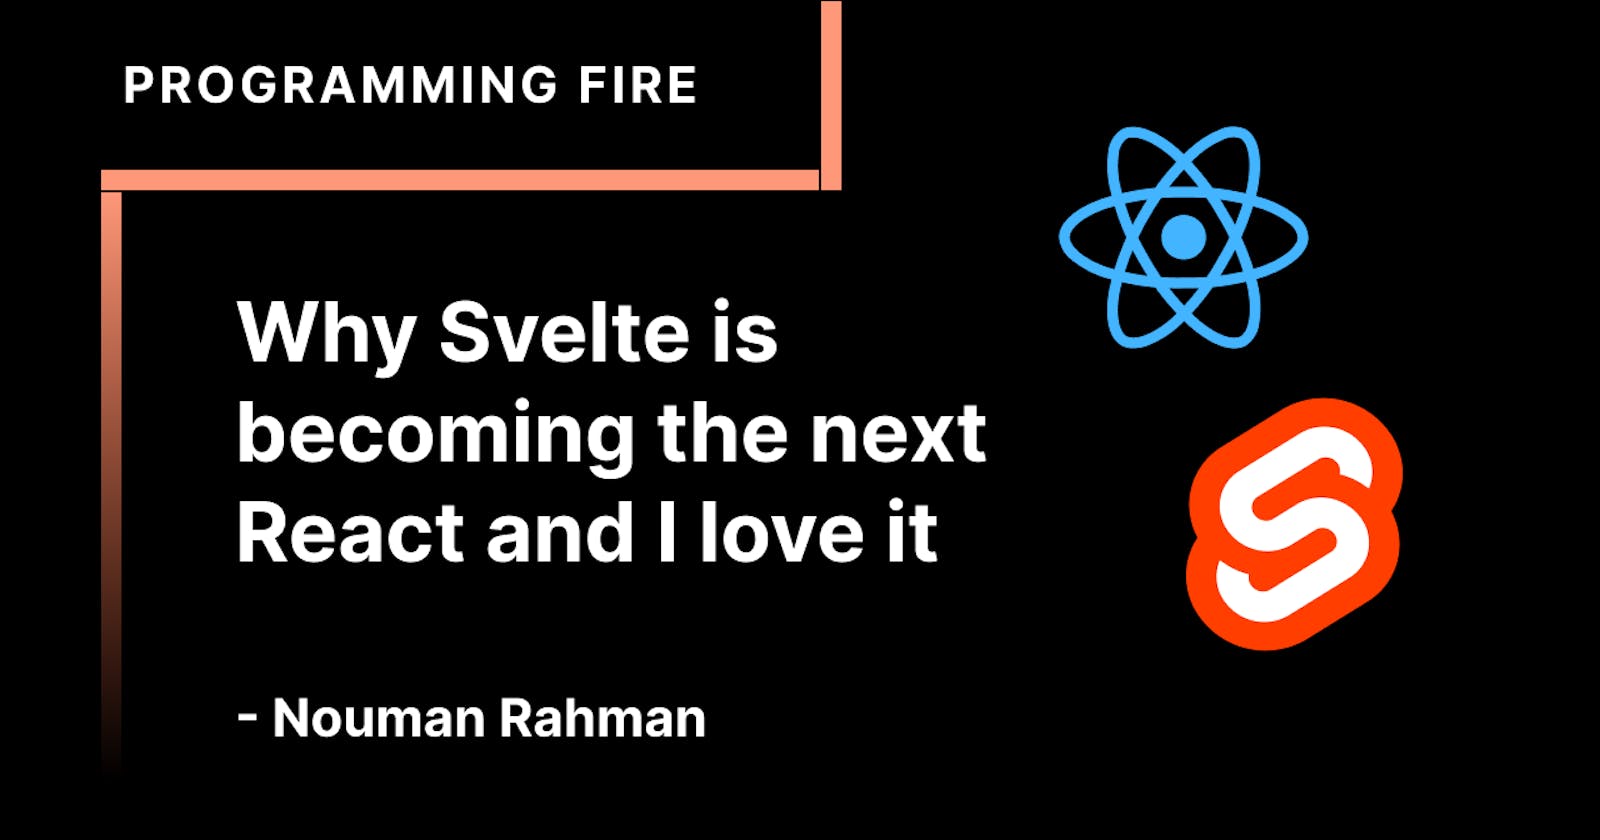 Why Svelte is becoming the next React and I love it